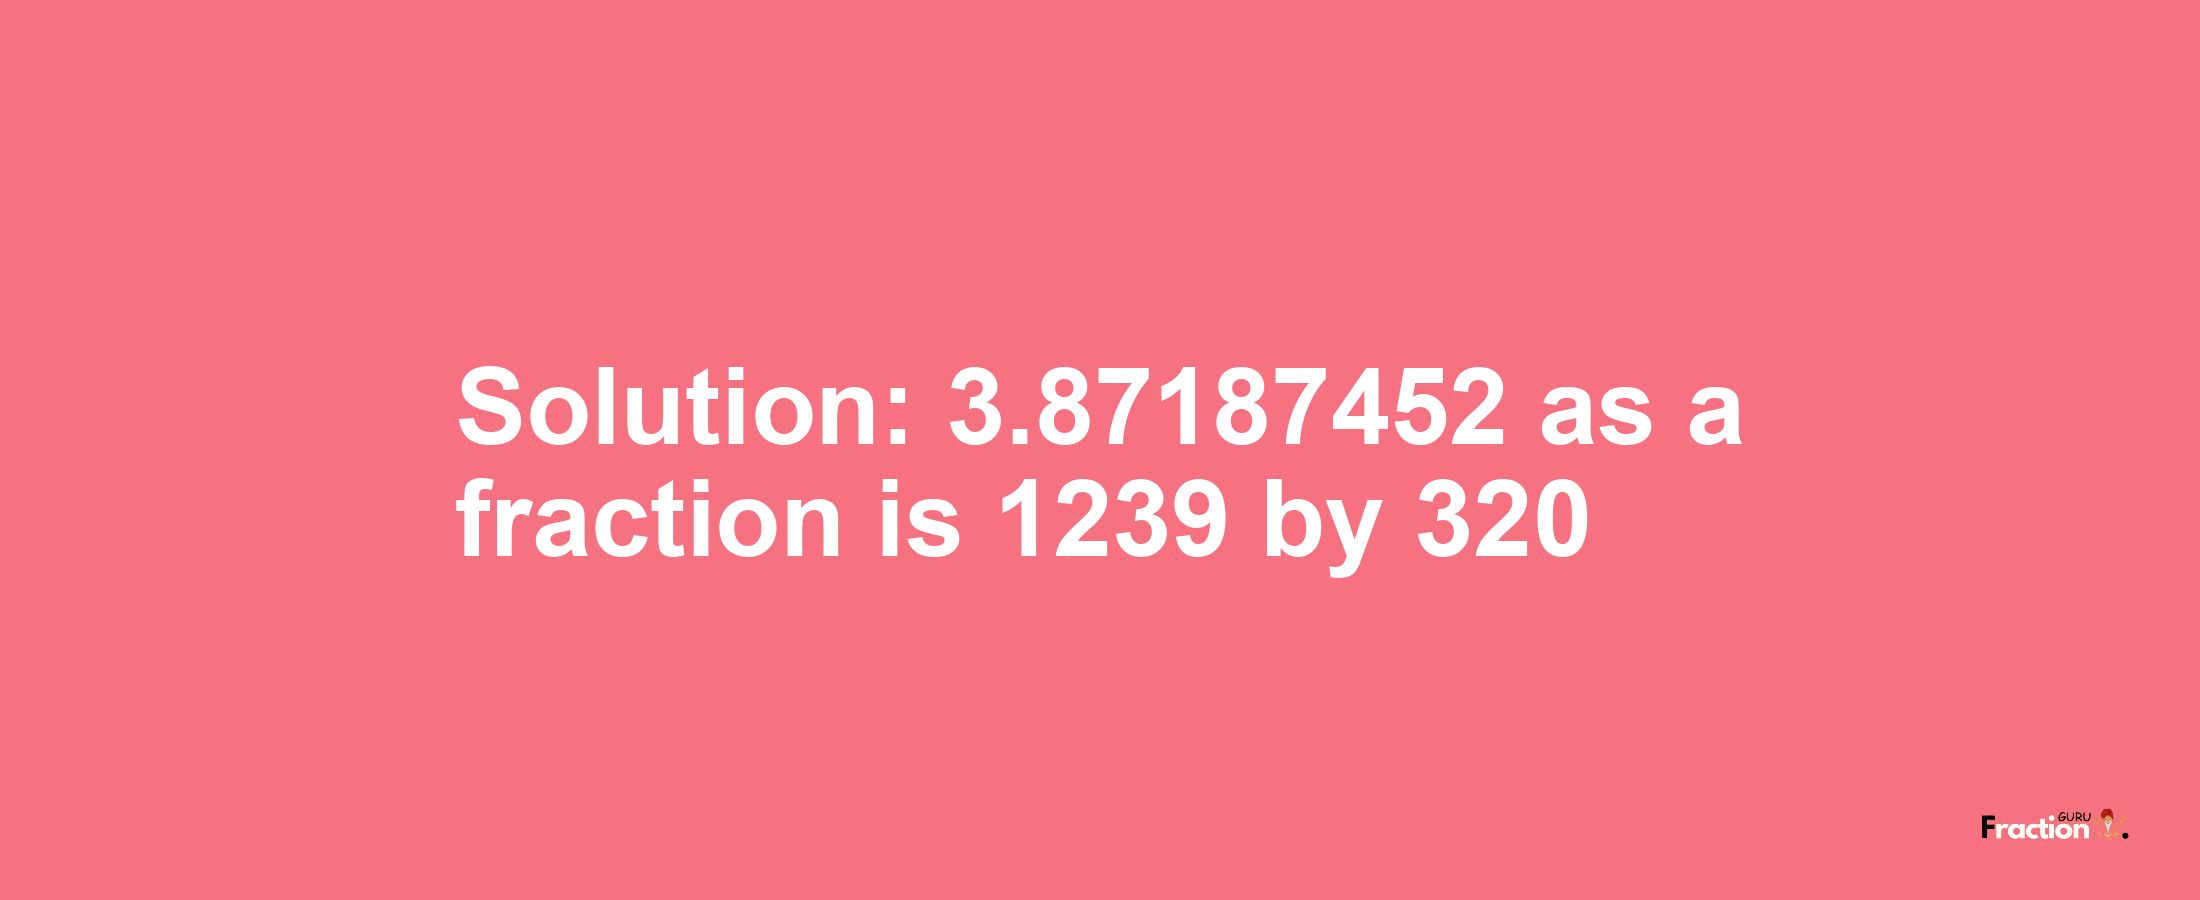 Solution:3.87187452 as a fraction is 1239/320